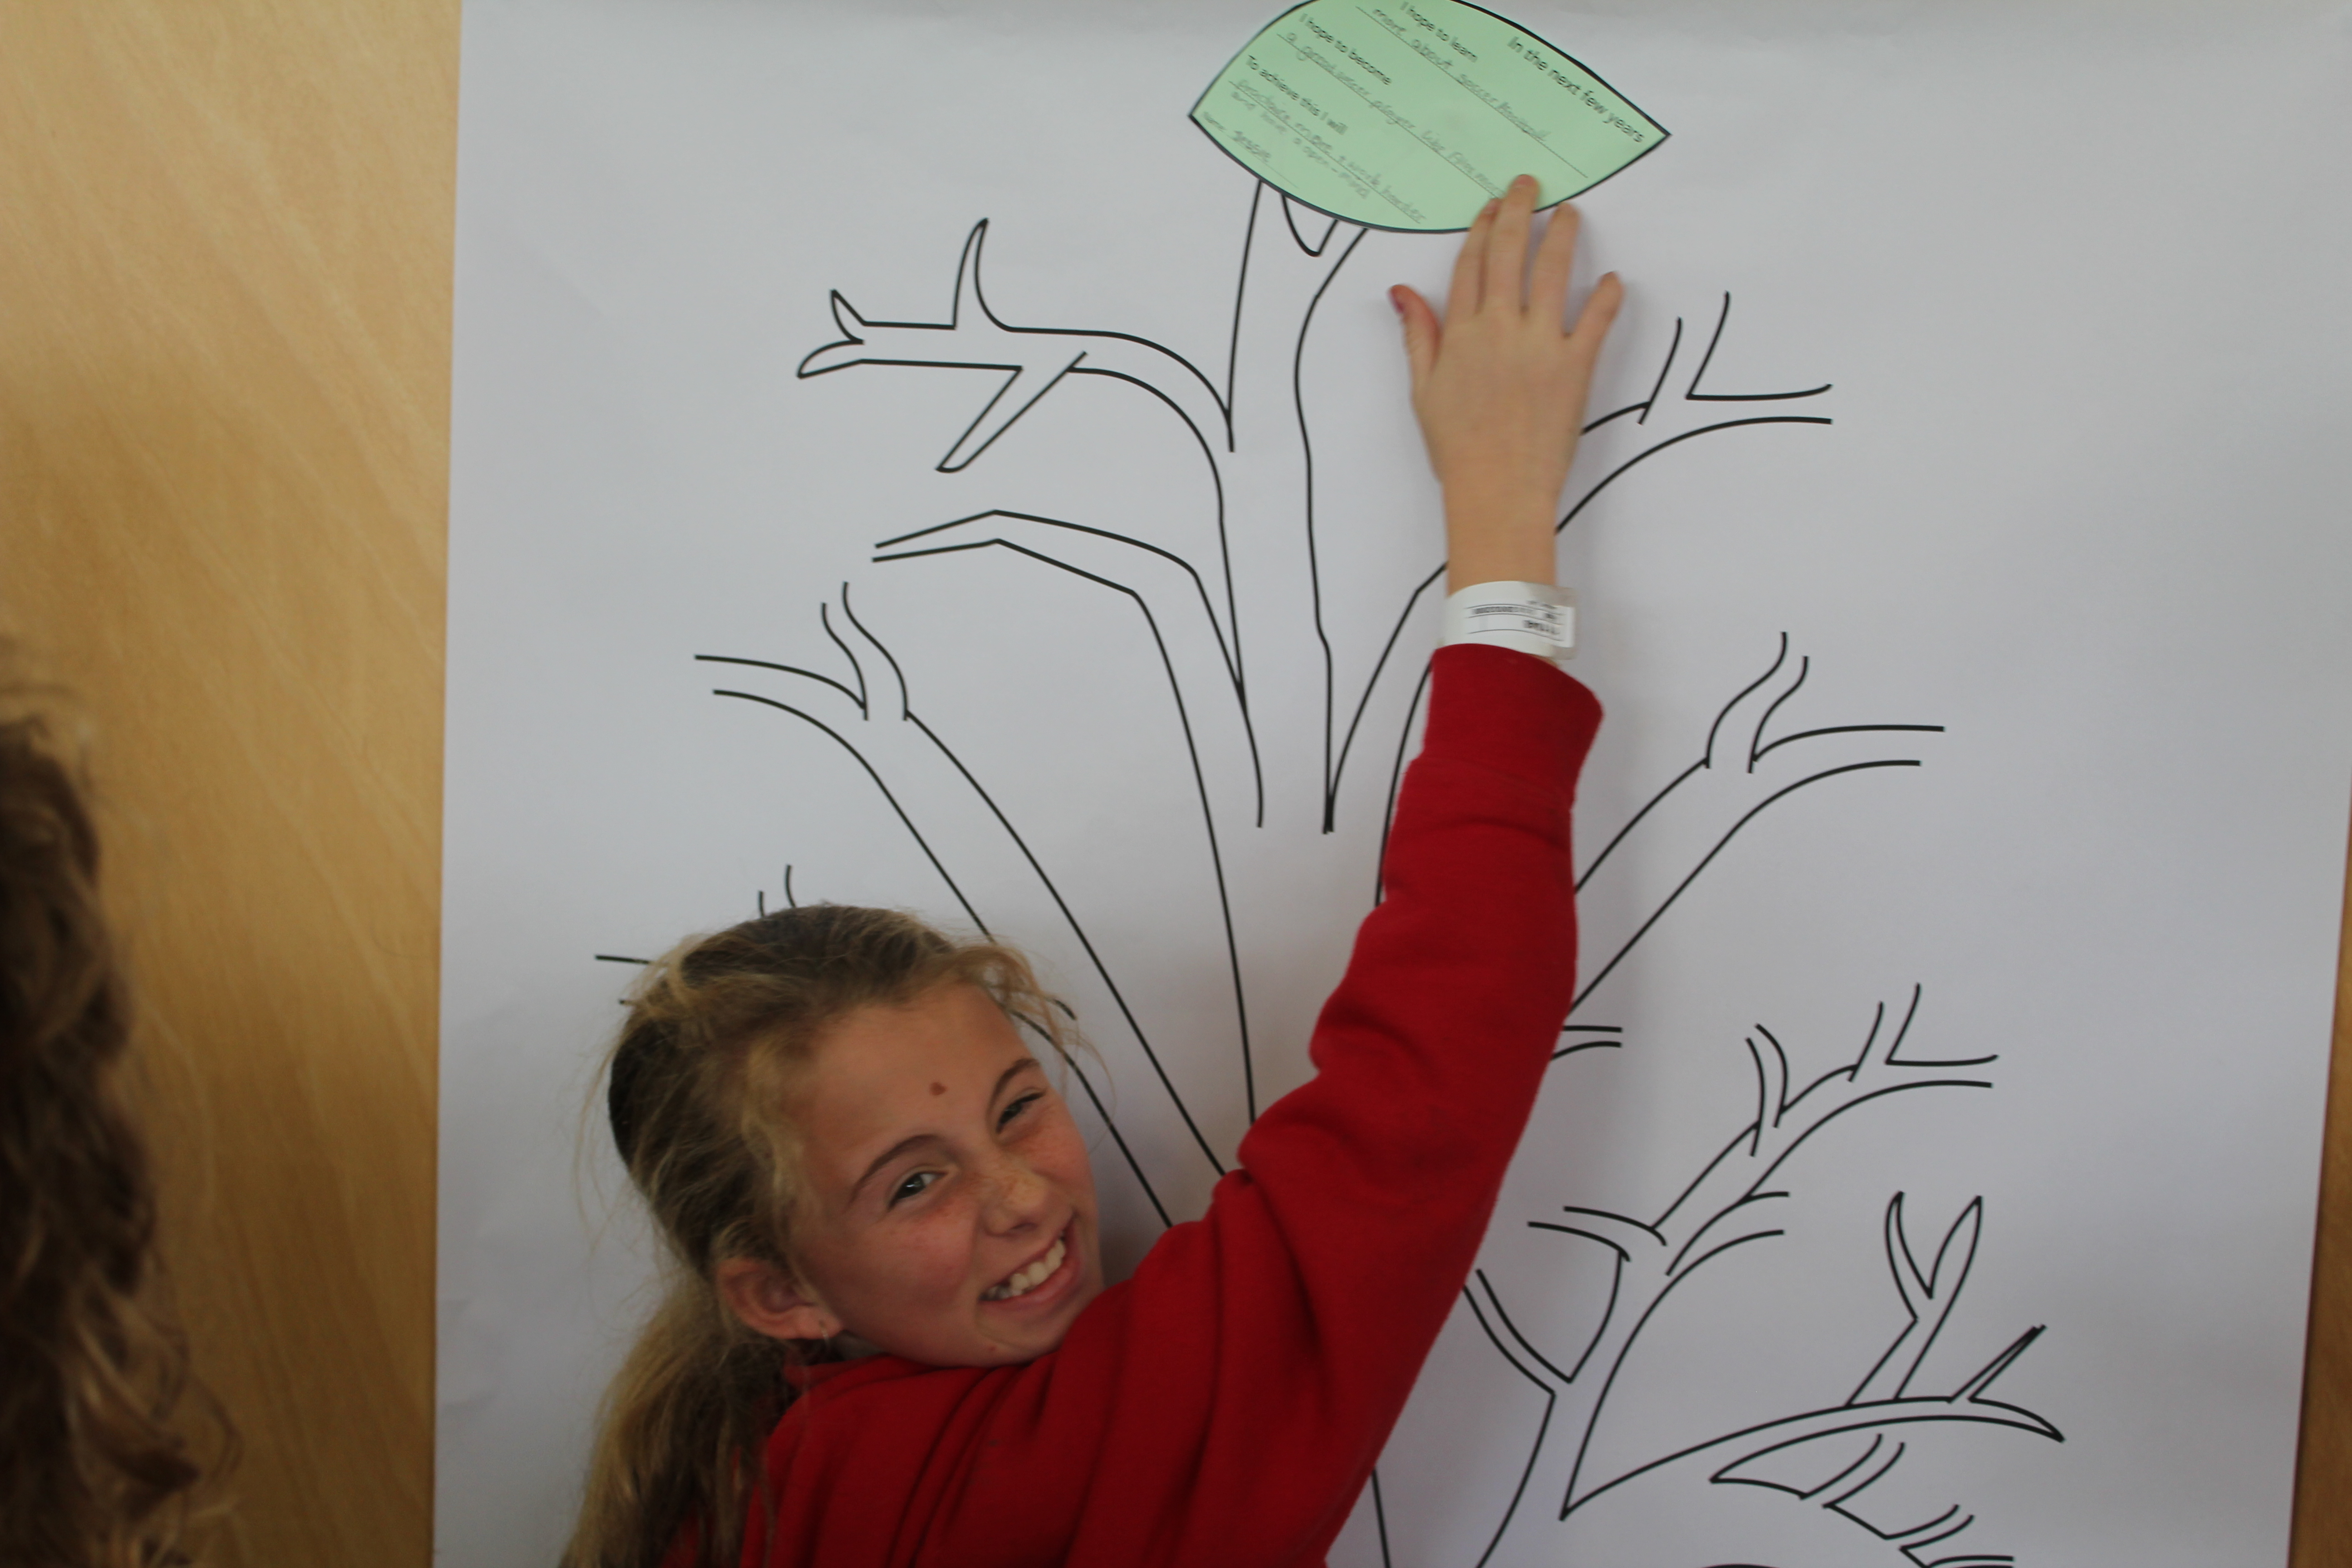 DreamSeeds participant points out her contribution to an activity.